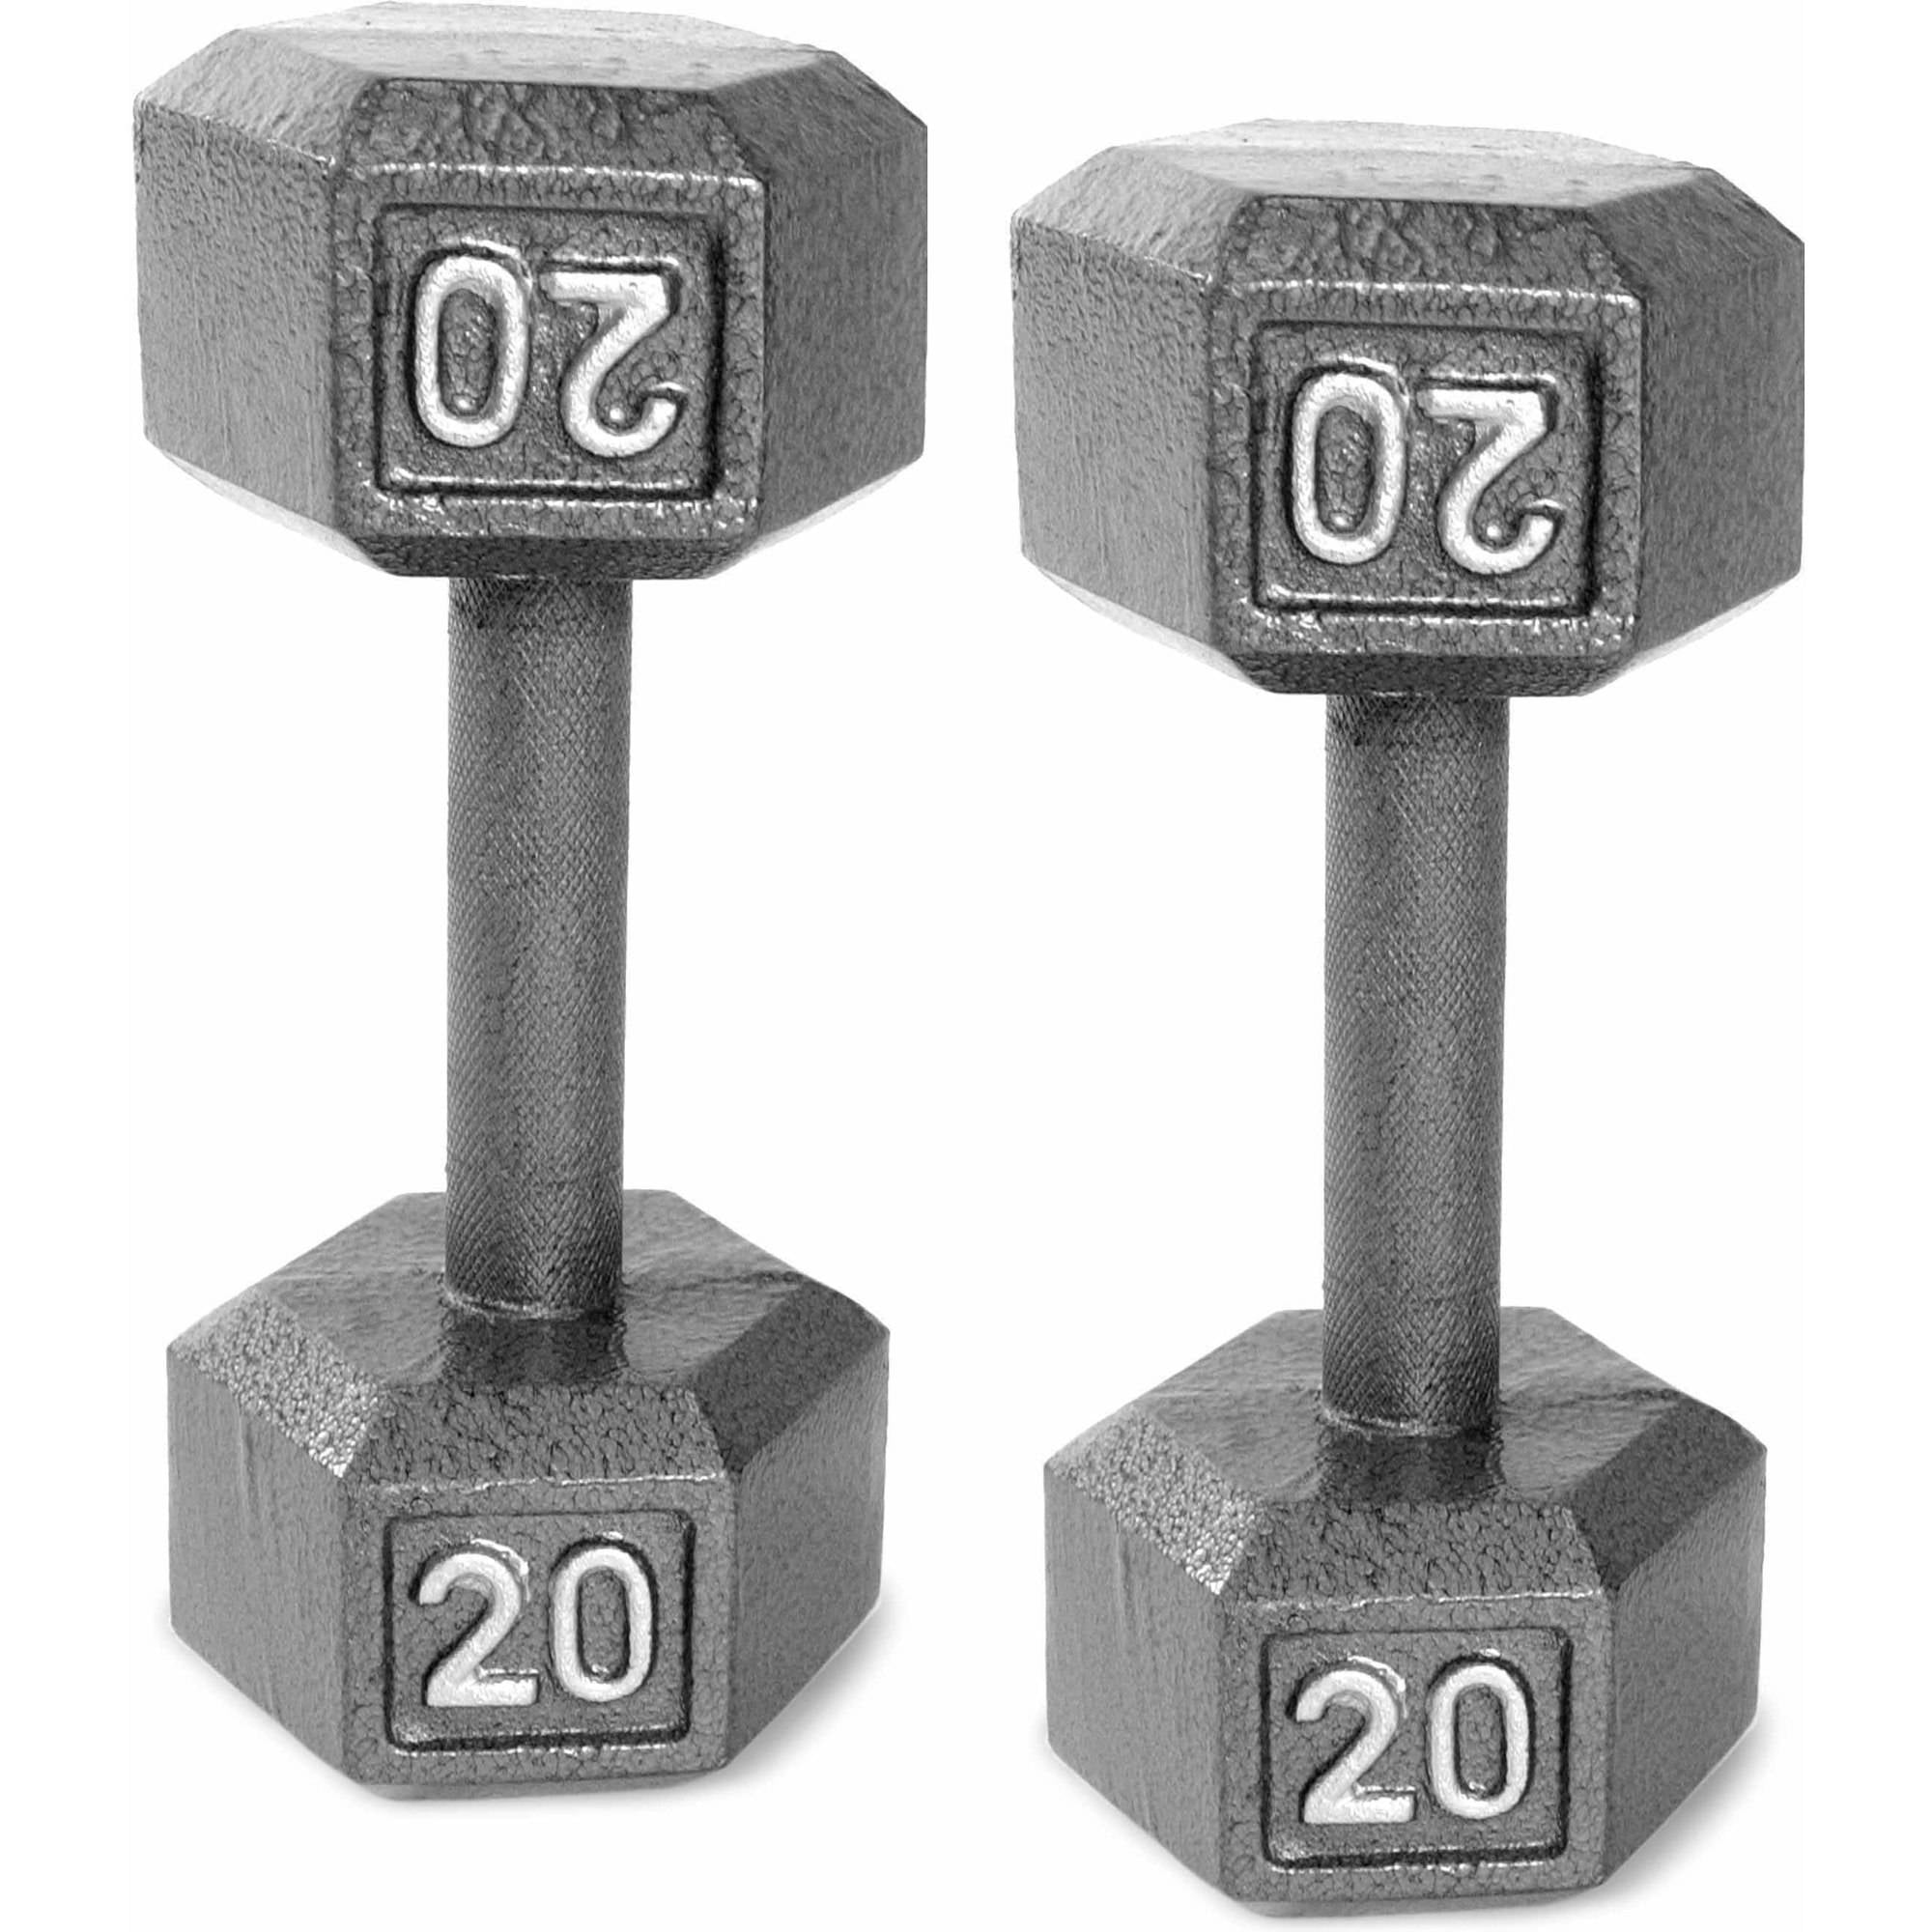 Multi-Select Weights Size Options Available Strength Training Free Weights Set of 2 for Women and Men Weights Sold by Pairs for Full Body Workout CAP Barbell Cast Iron Solid Hexagon Gray Dumbbells